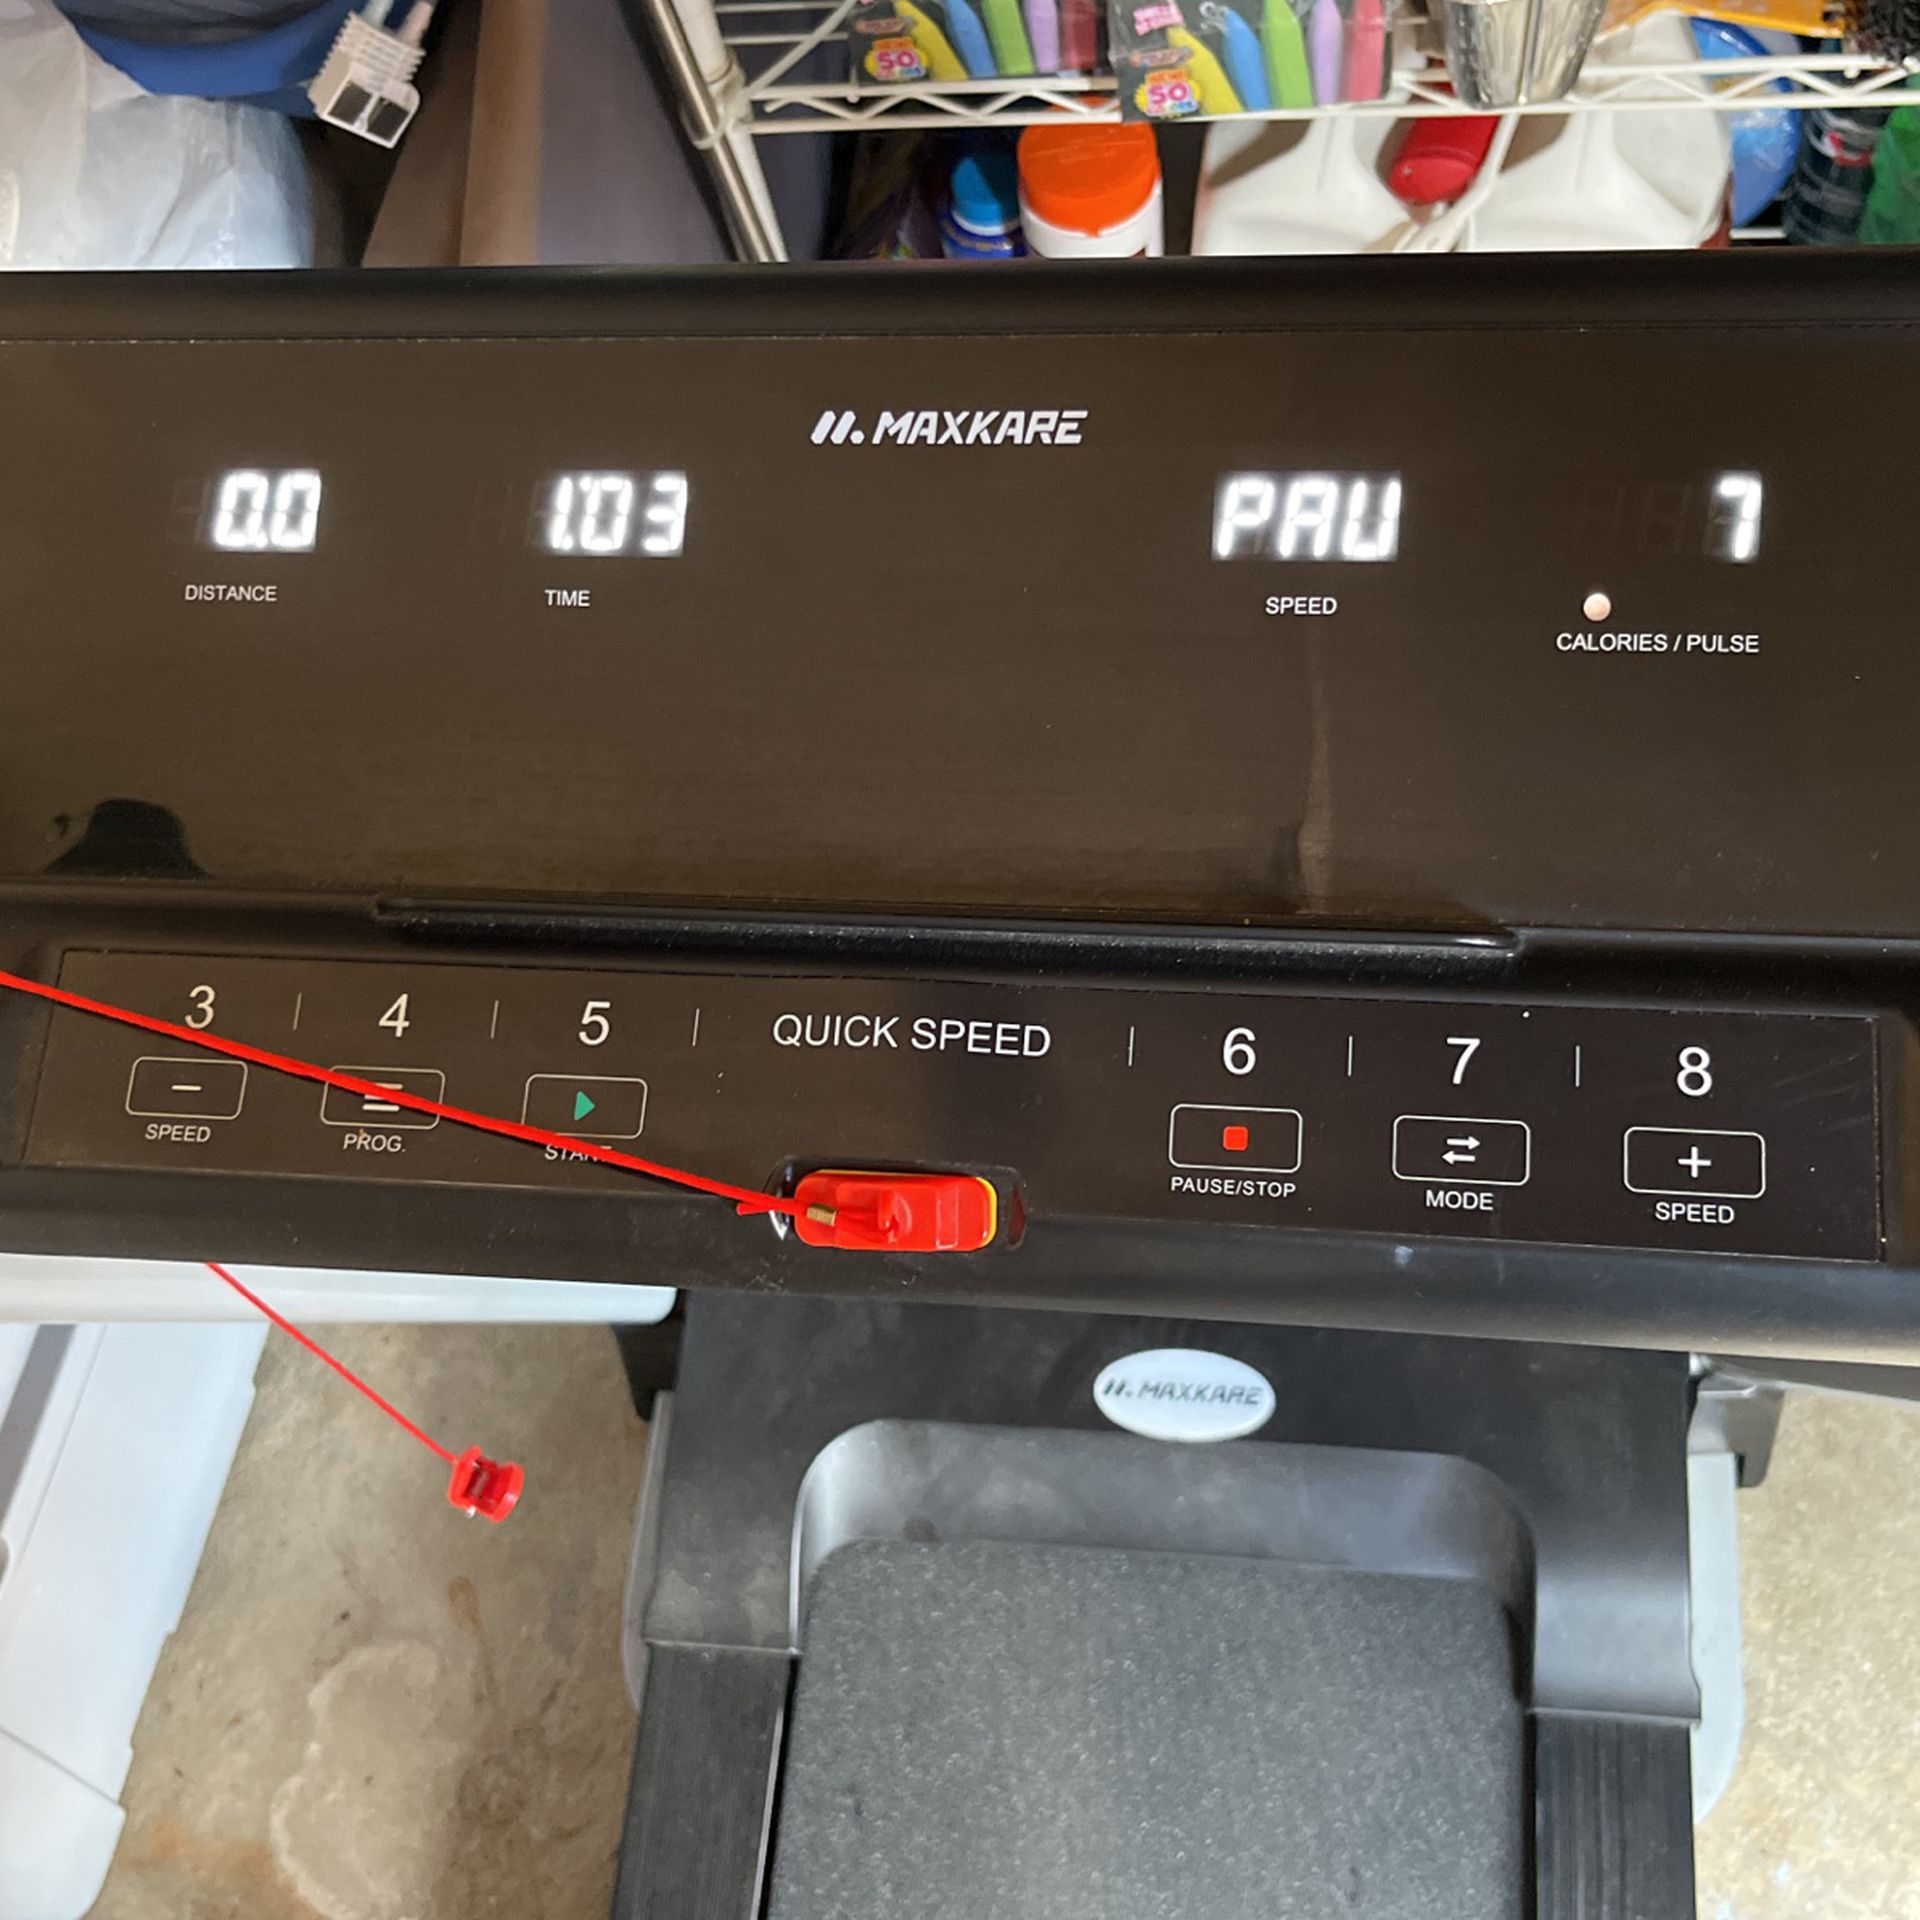 Selling Small Used Treadmill $65 OBO.